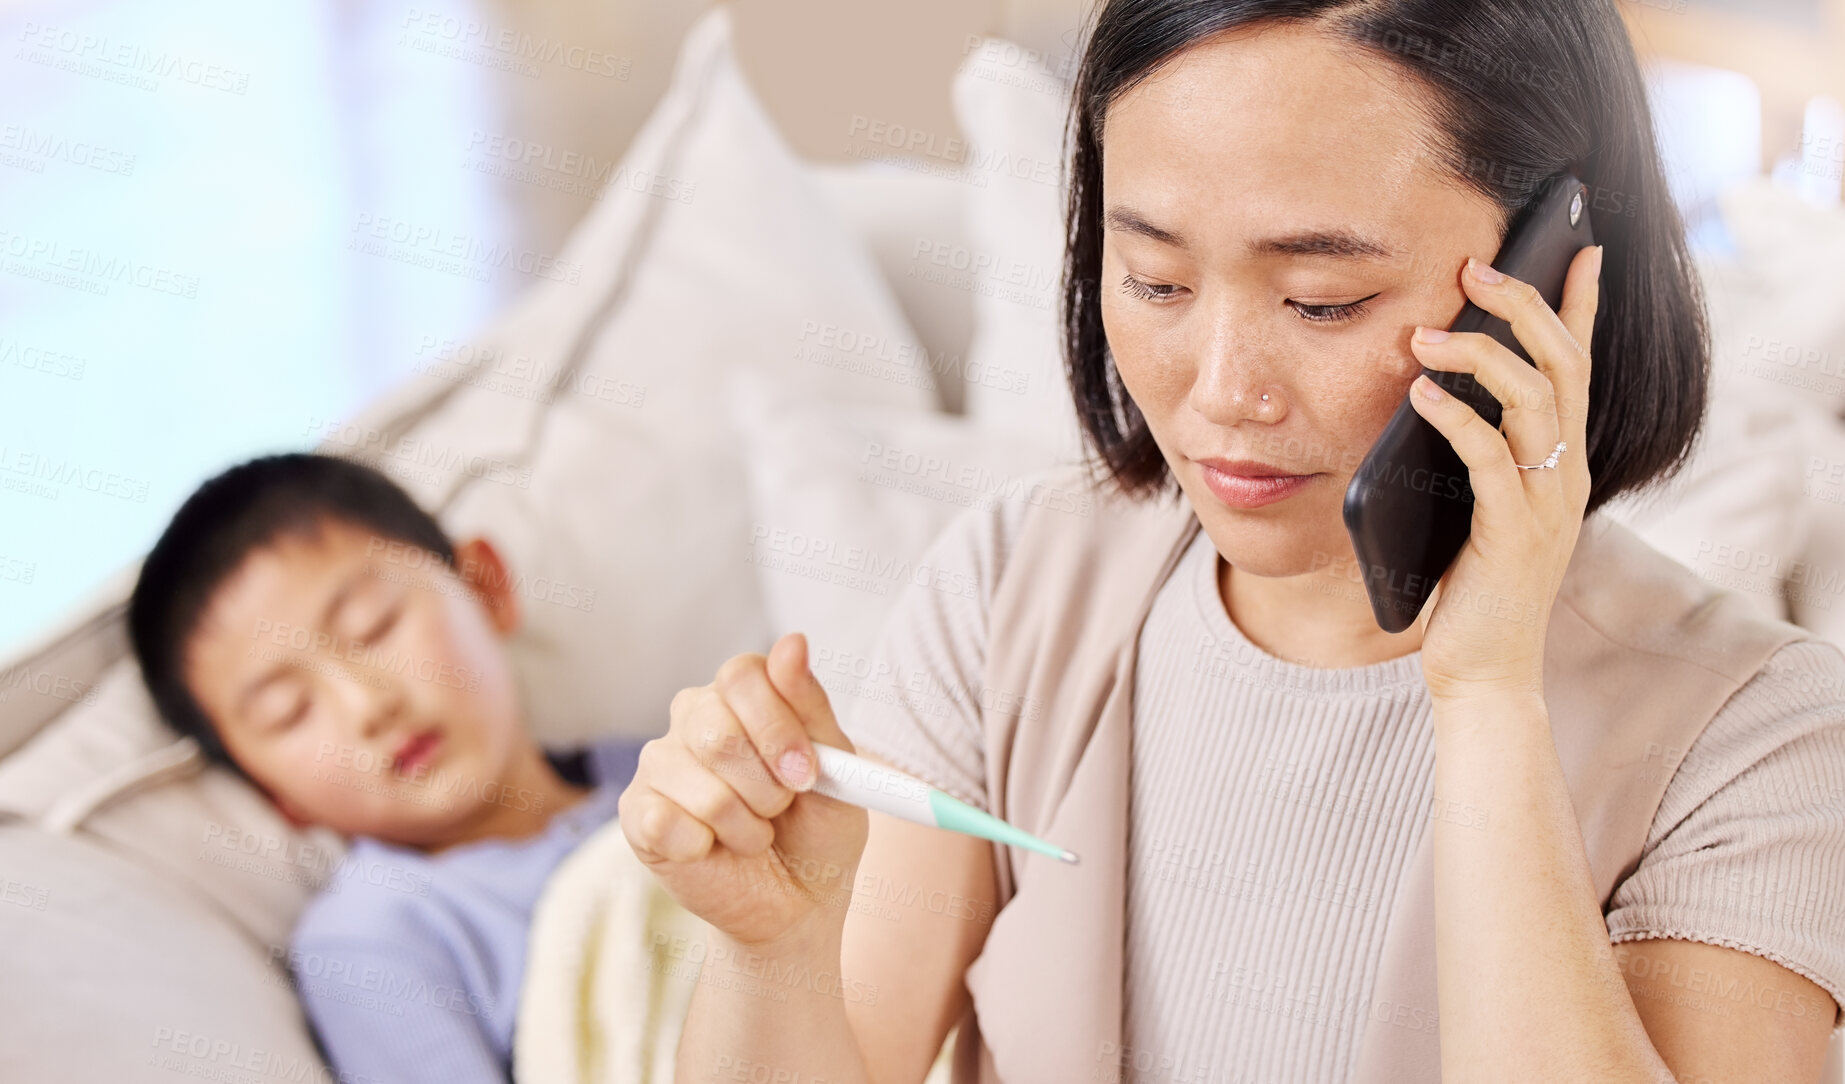 Buy stock photo Shot of a woman talking on the phone after taking her child's temperature